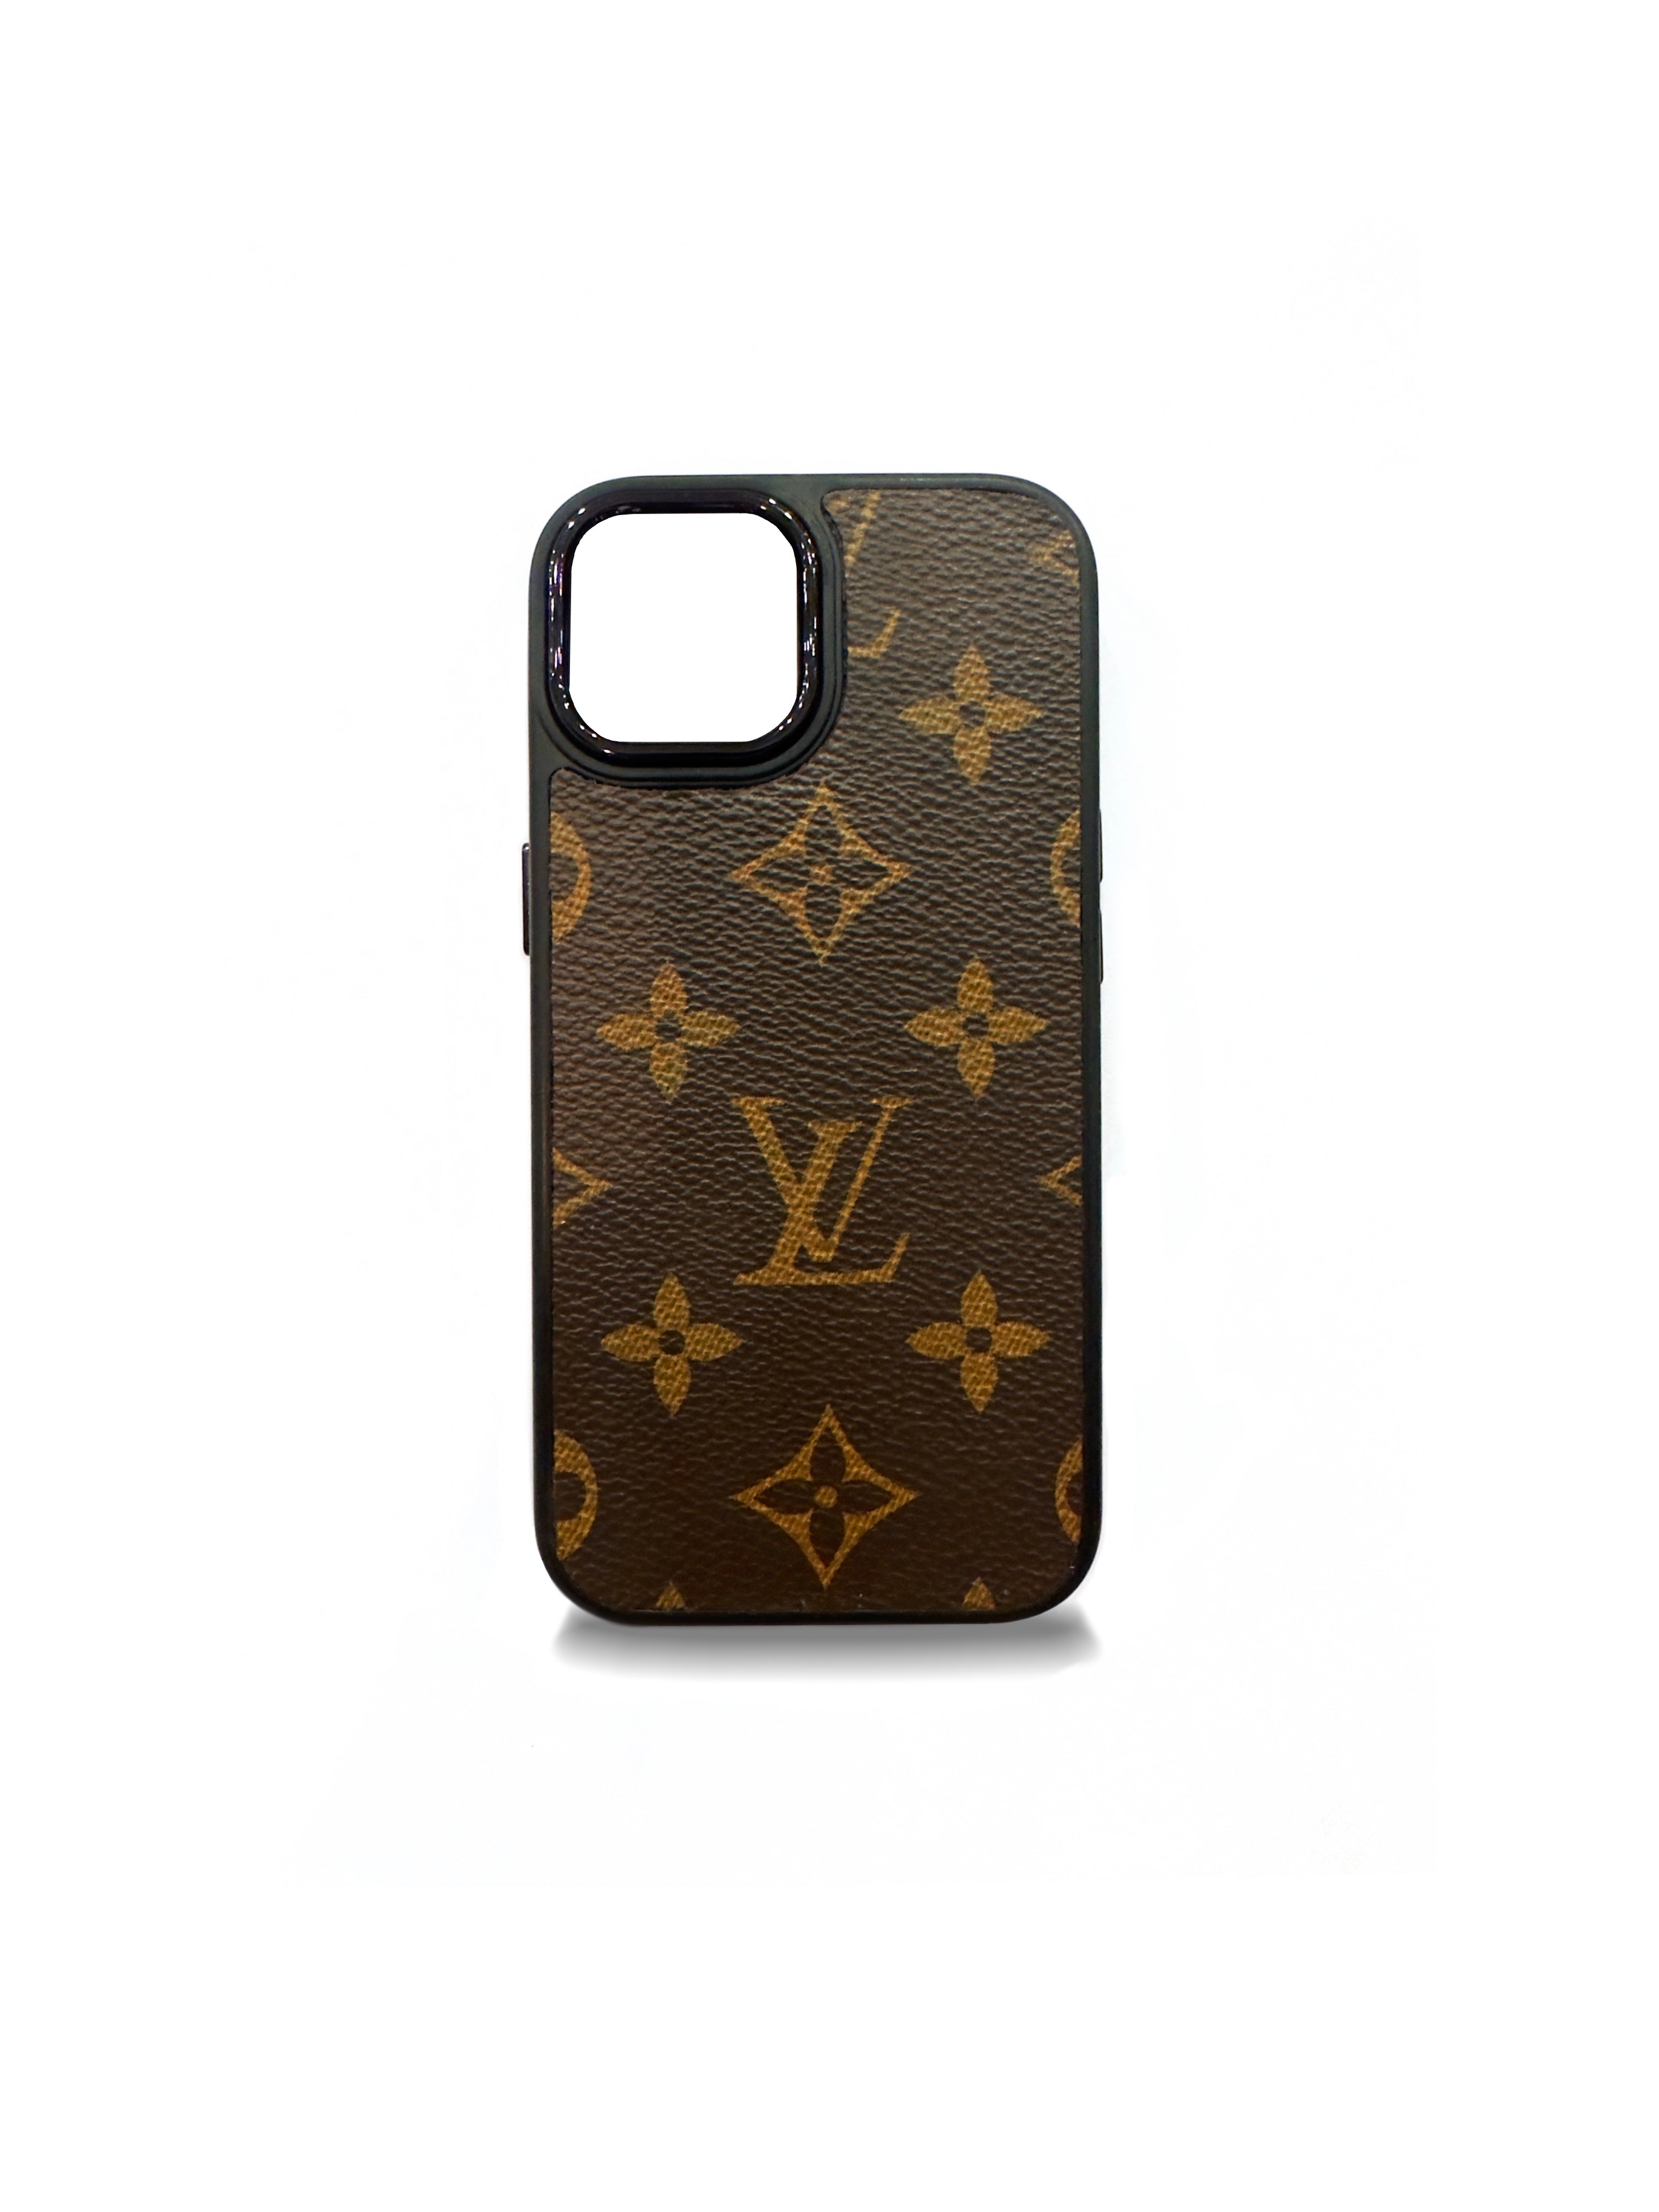 Louis Vuitton's Monogram V as a symbol of French chic and impeccable  craftsmanship